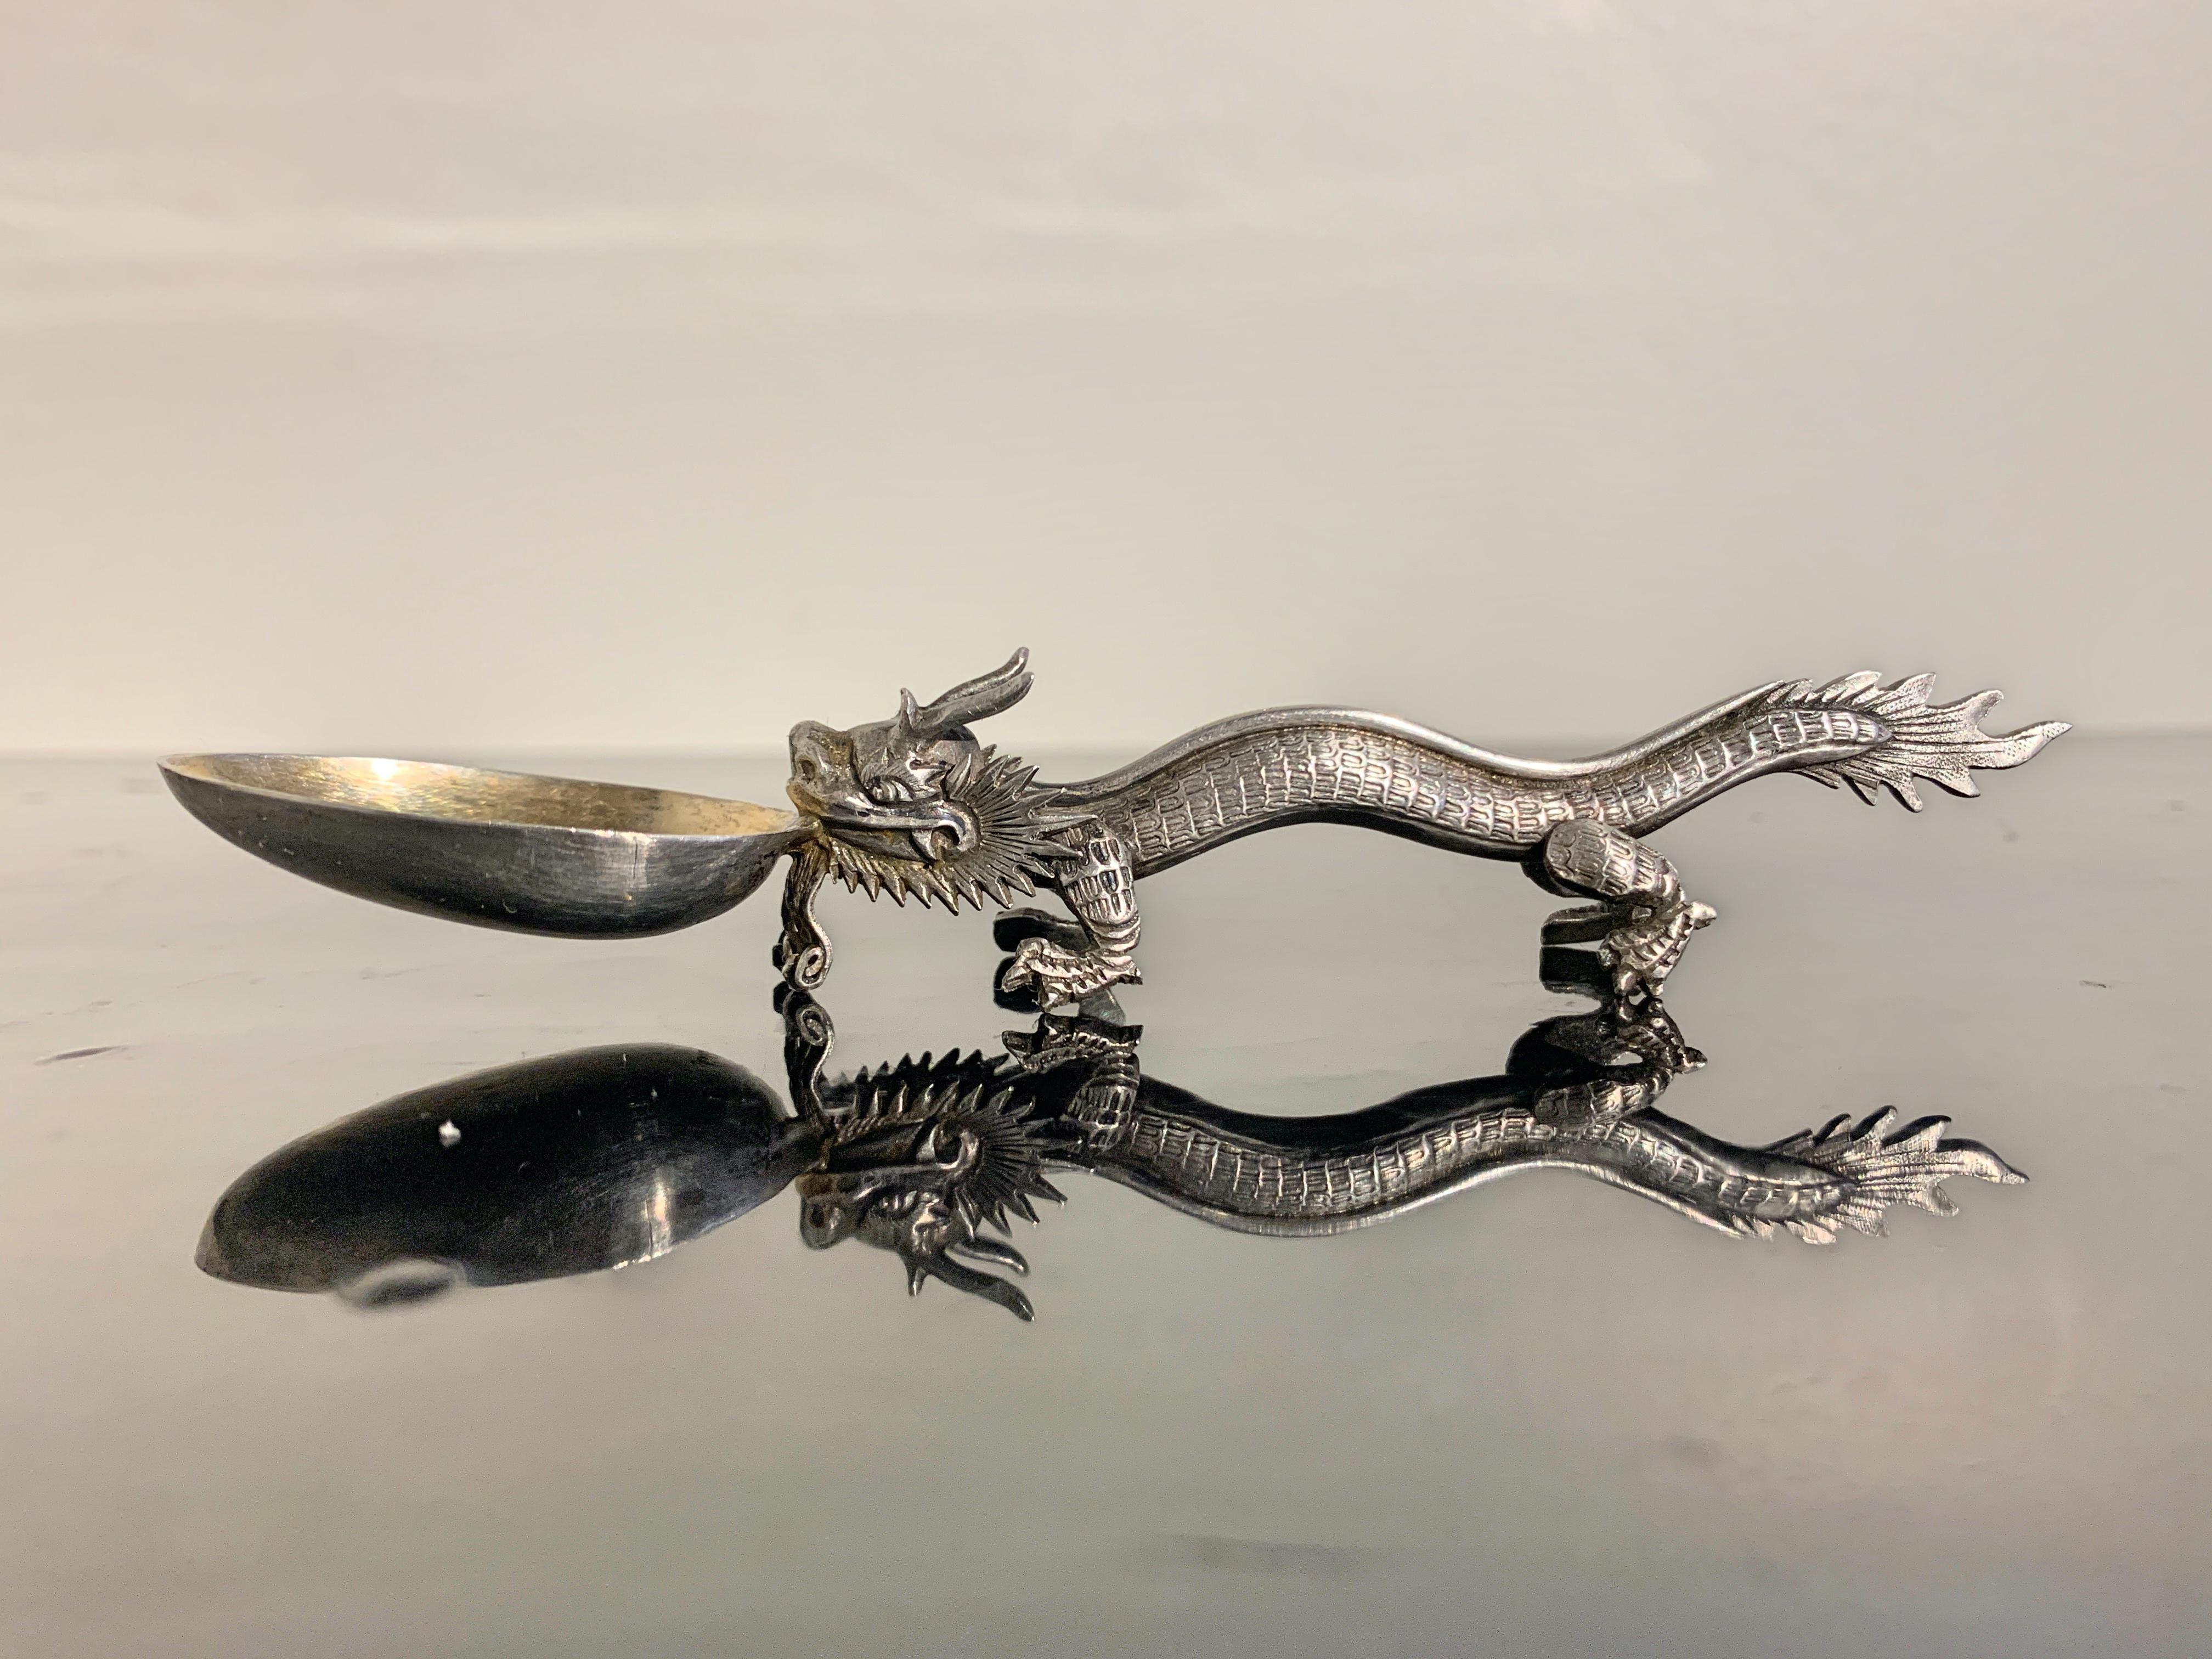 A very fine and charming Chinese export silver spoon in the form of a dragon, by Wang Hing & Co., Qing Dynasty, late 19th century, China.

The small spoon masterfully designed with the handle in the form of a prancing dragon holding the gilt bowl